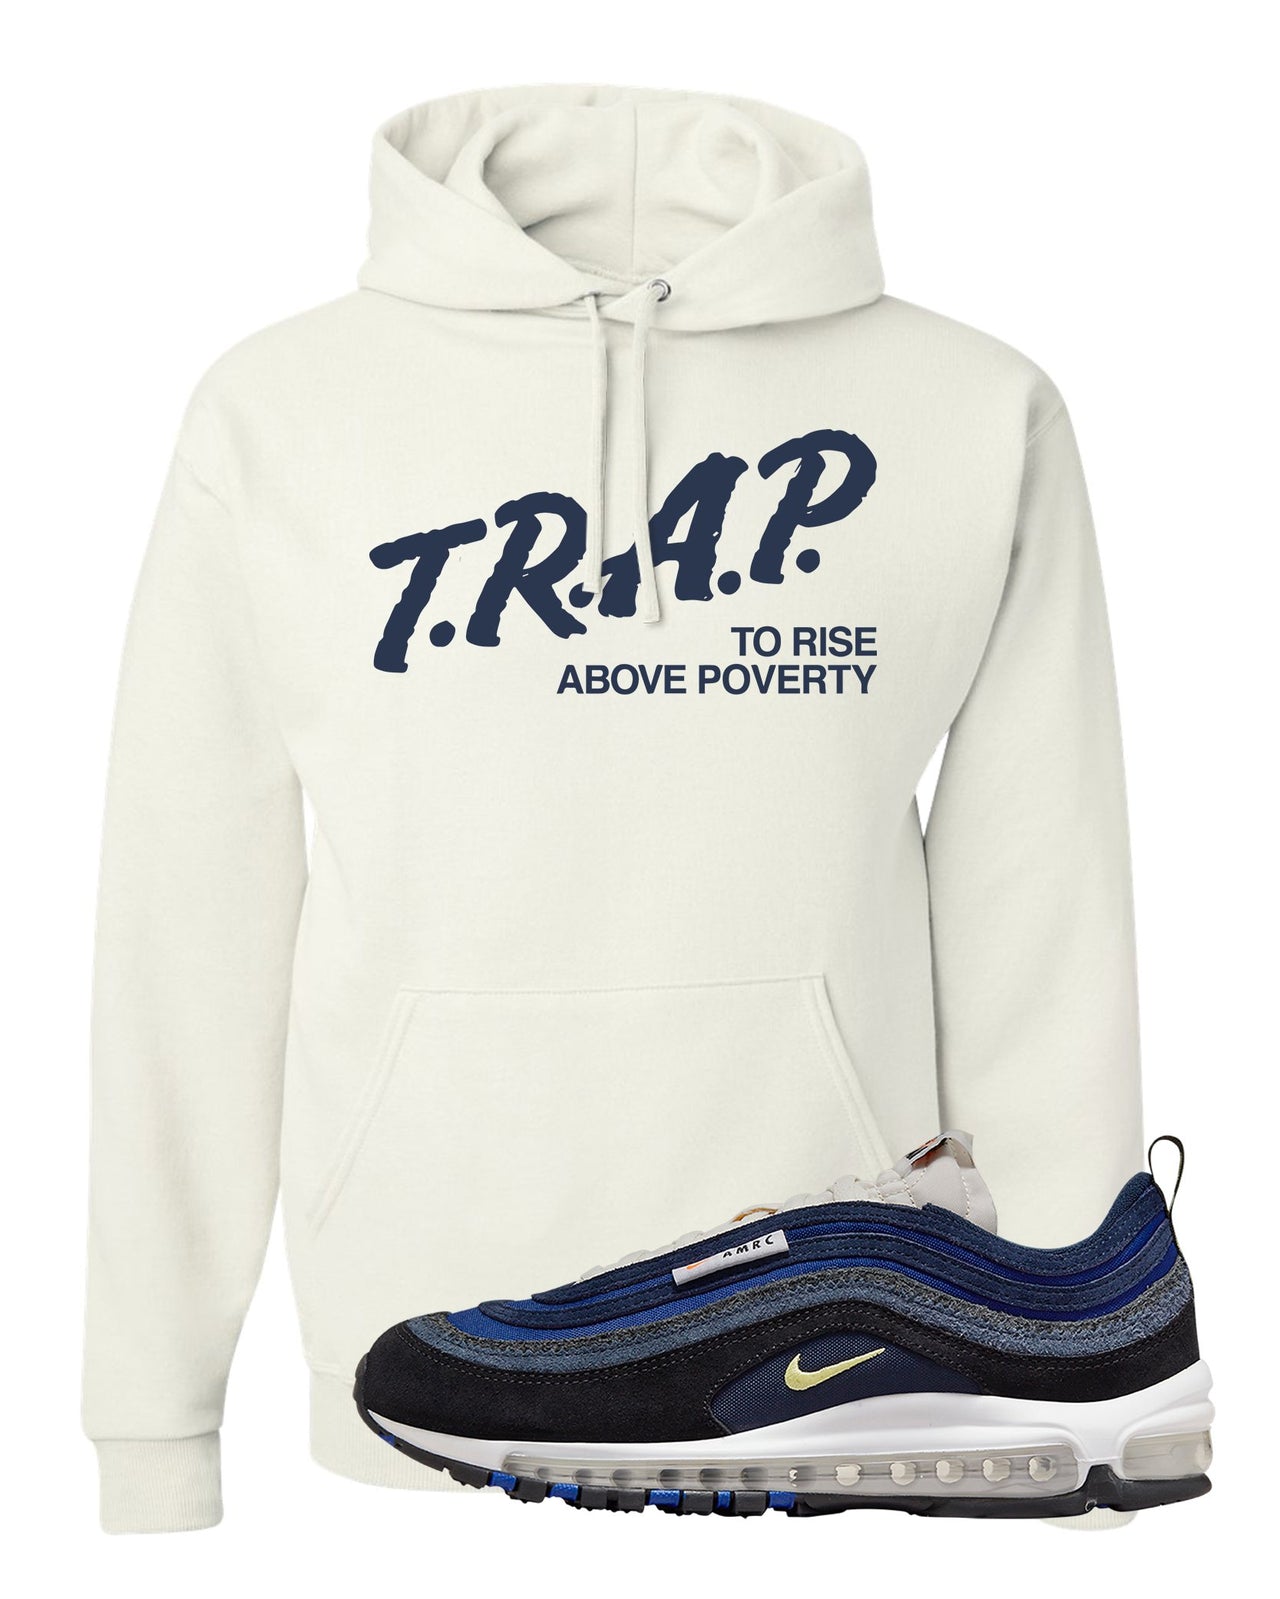 Navy Suede AMRC 97s Hoodie | Trap To Rise Above Poverty, White